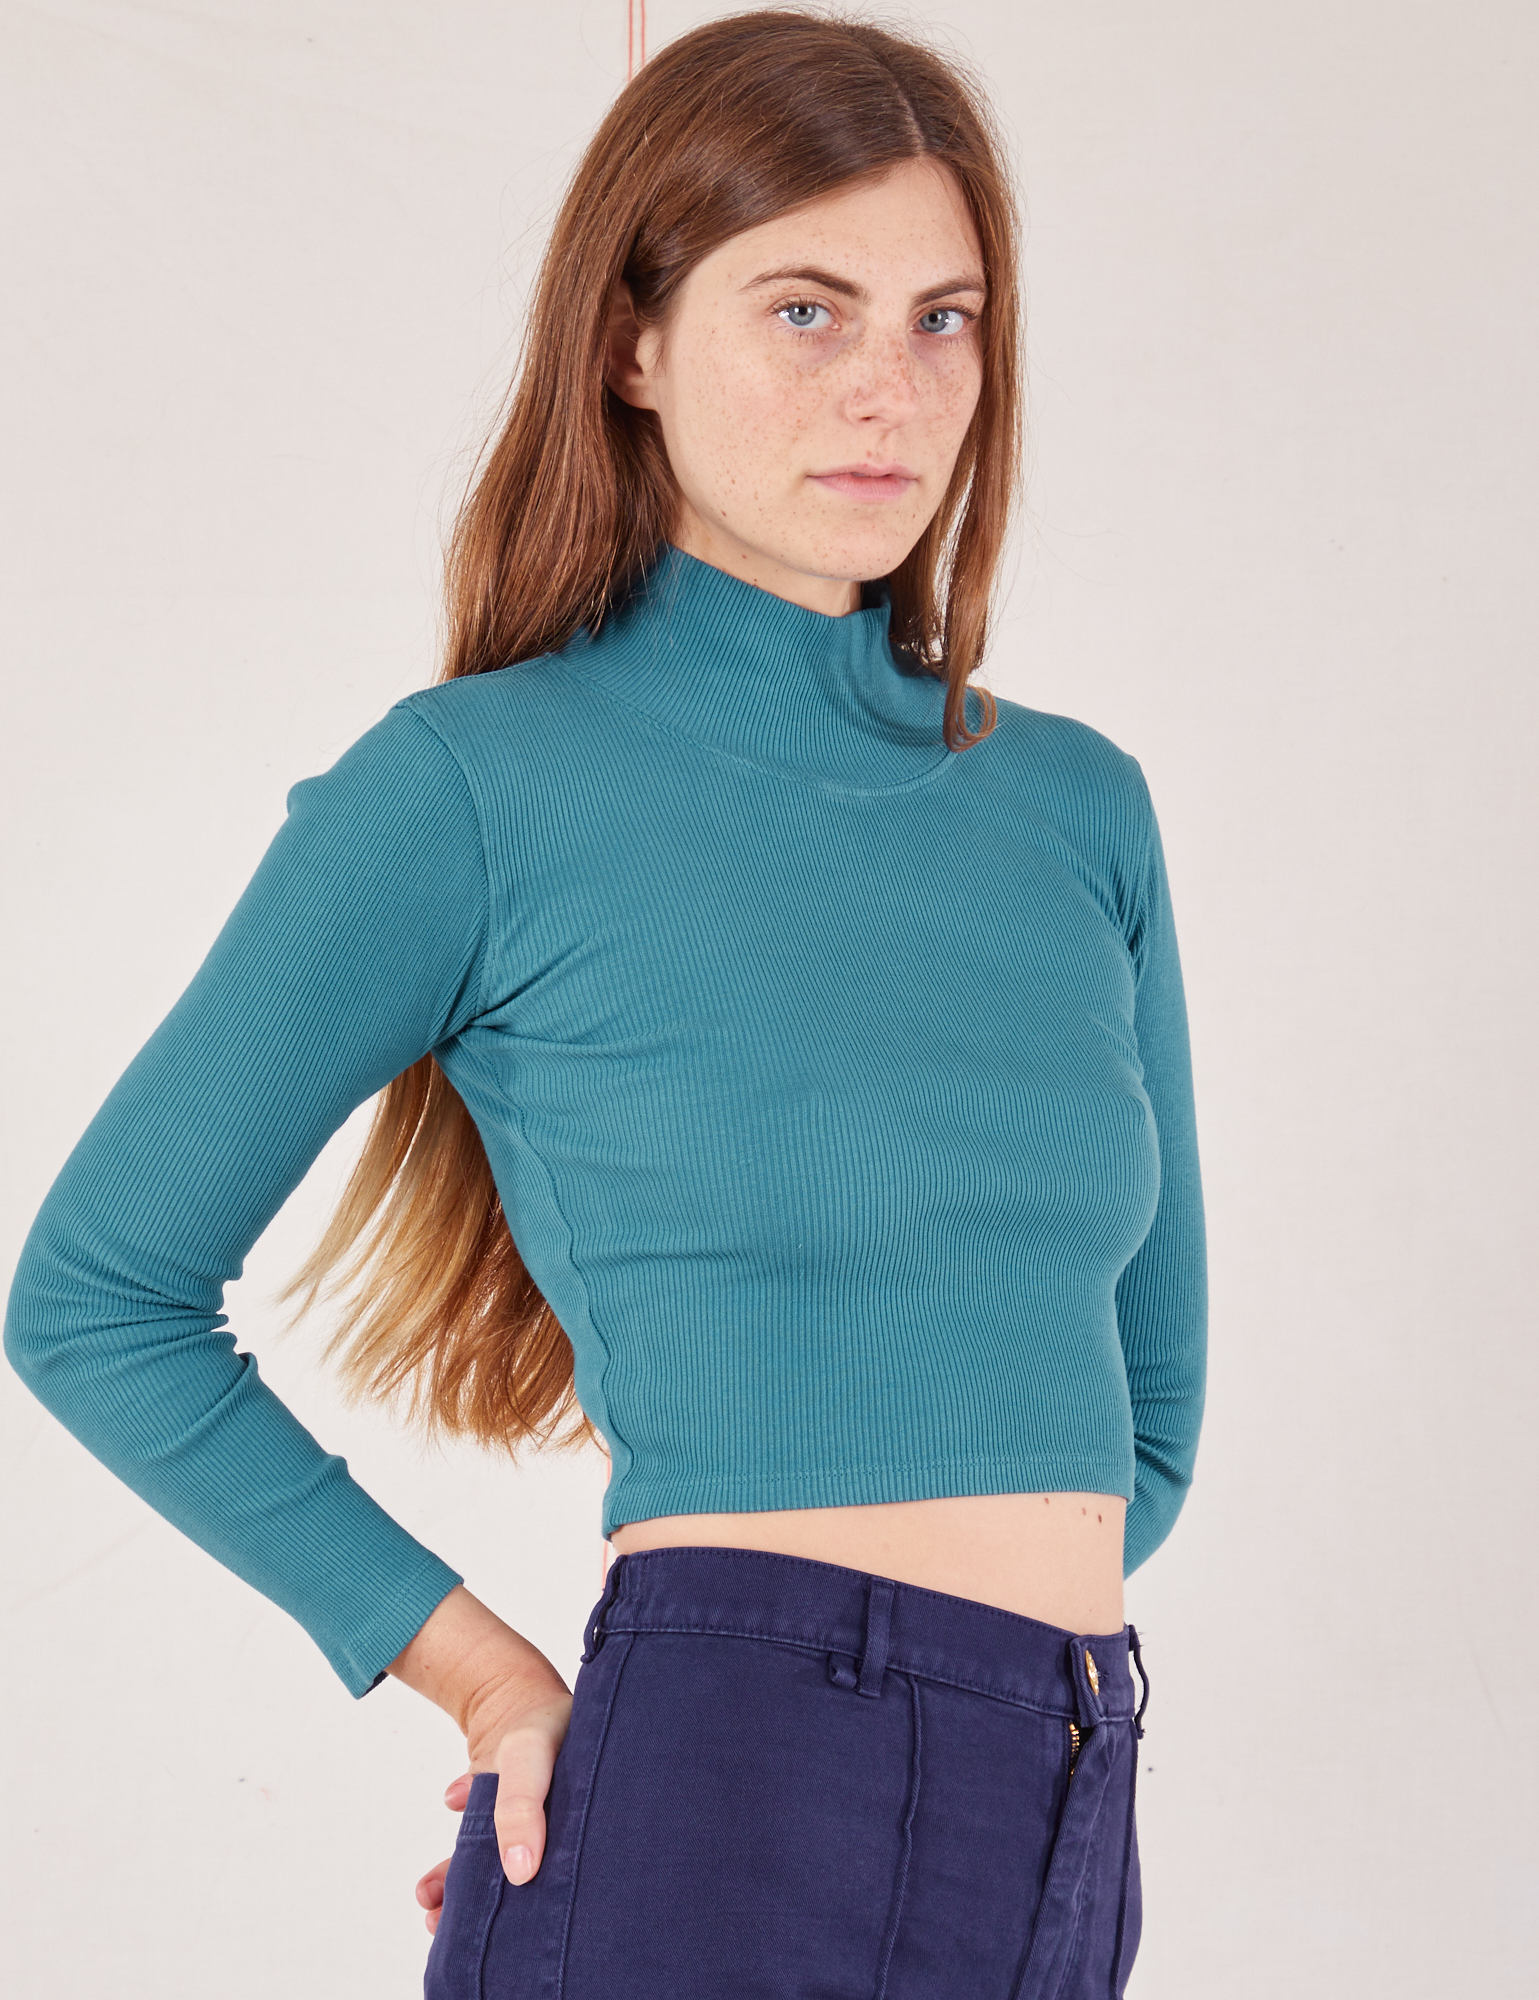 Essential Turtleneck in Marine Blue angled front view of Scarlett